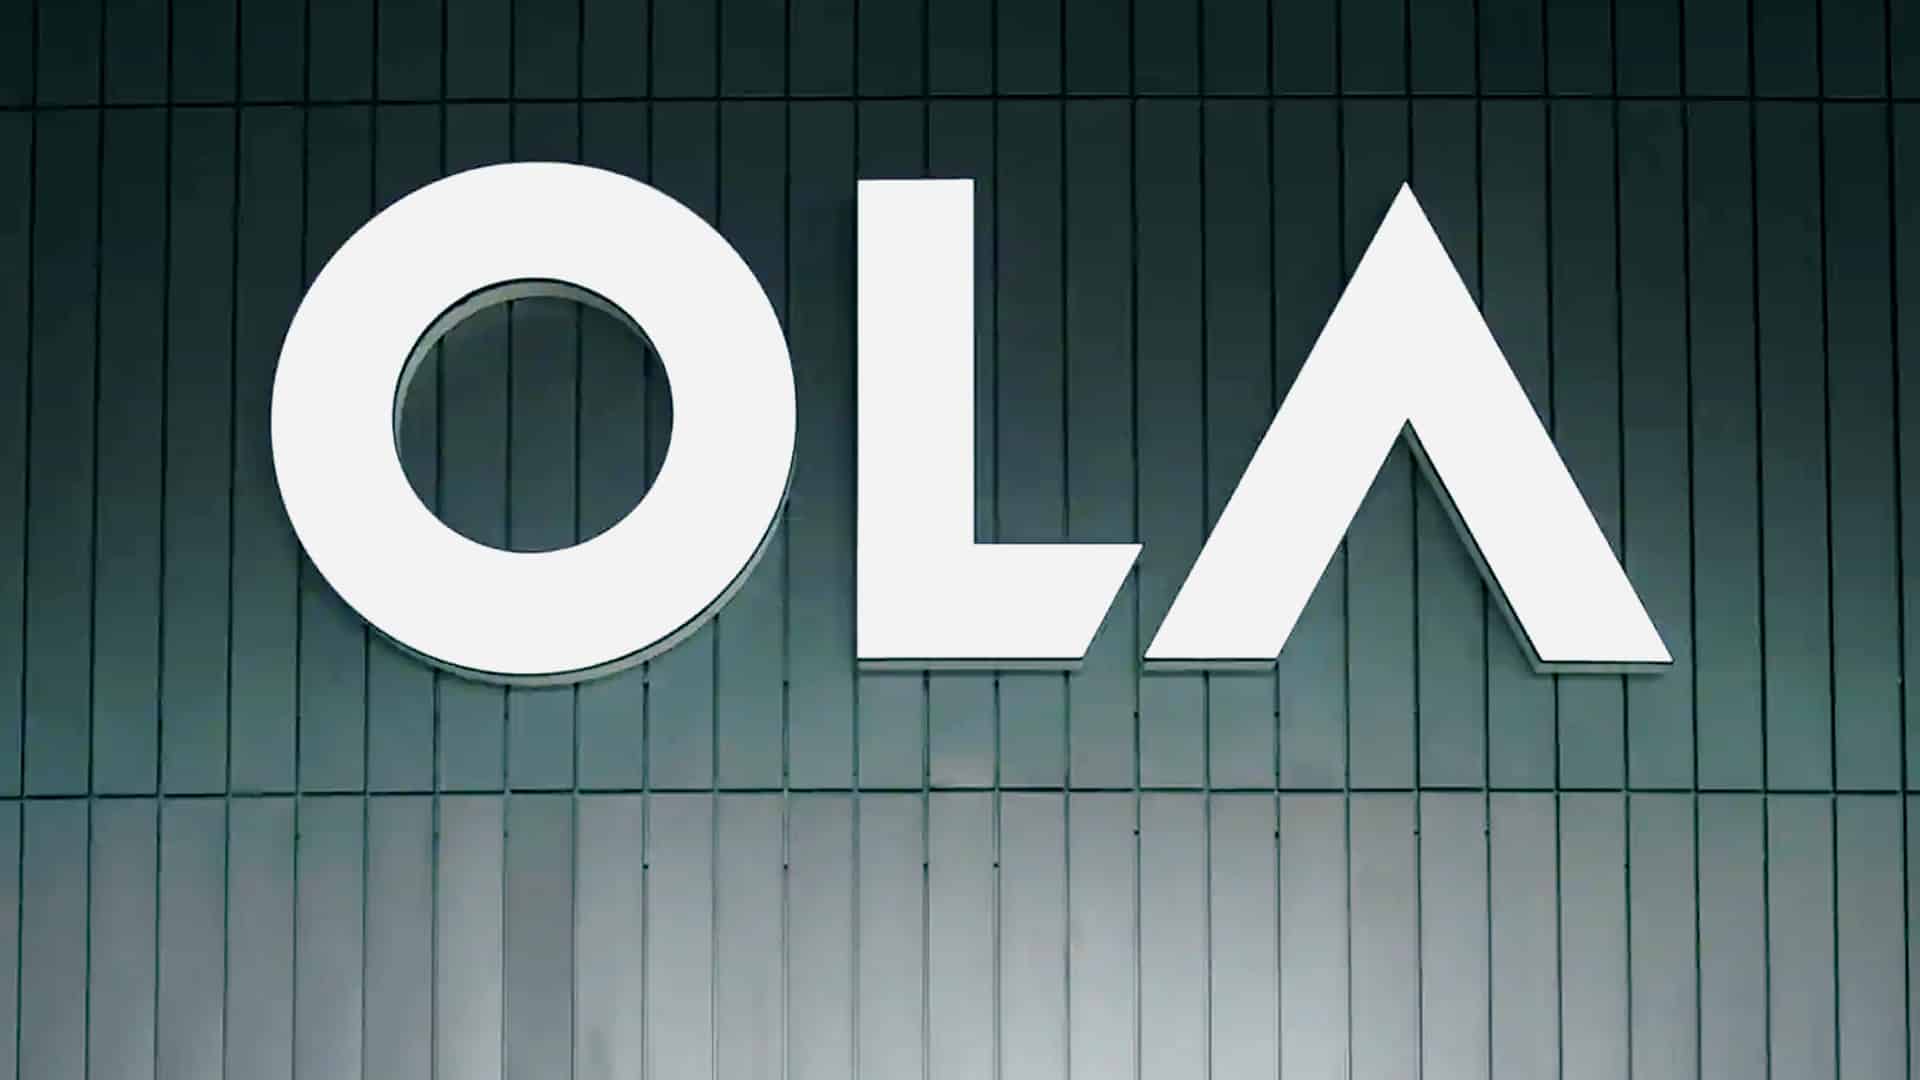 Ola in talks to raise over $1bn through equity, debt: Sources